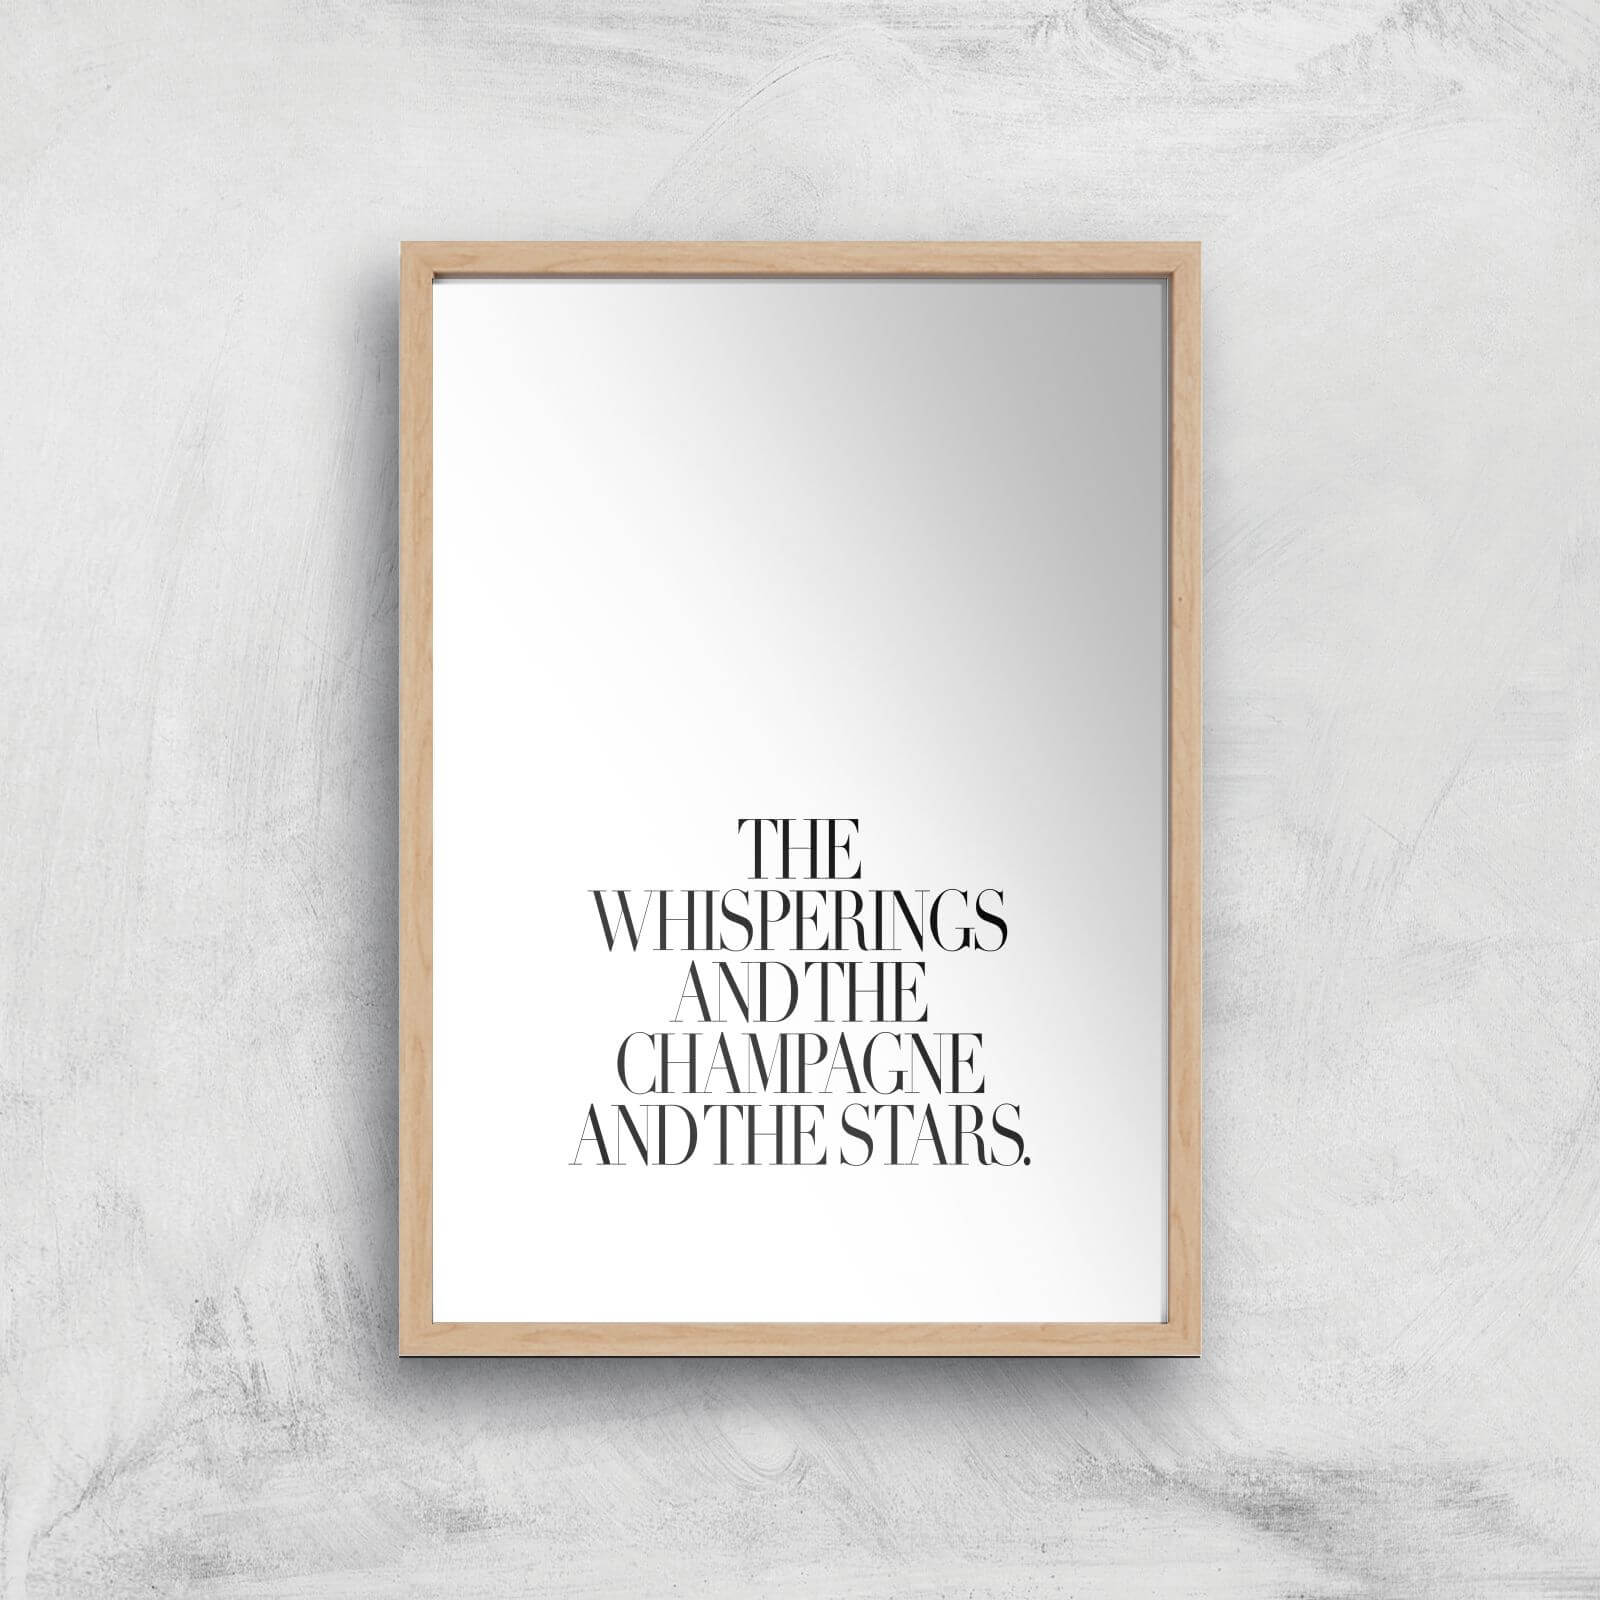 The Whisperings And The Champagne Giclee Art Print - A2 - Wooden Frame